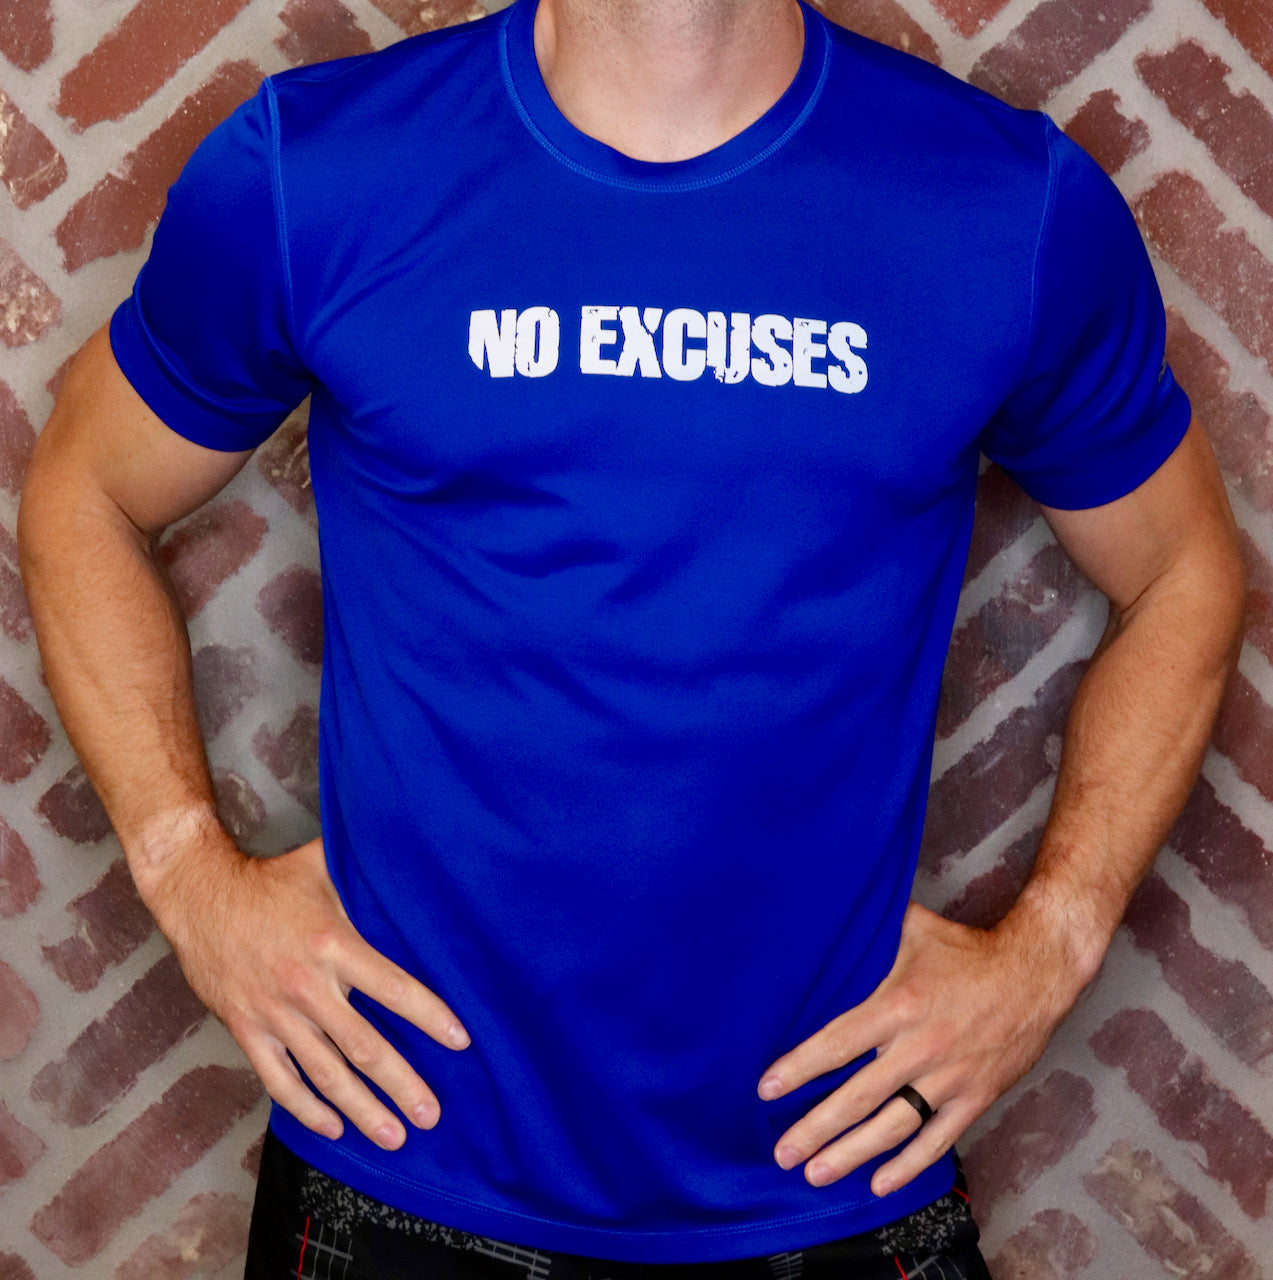 MK Supplements NO EXCUSES T-Shirt in Blue.